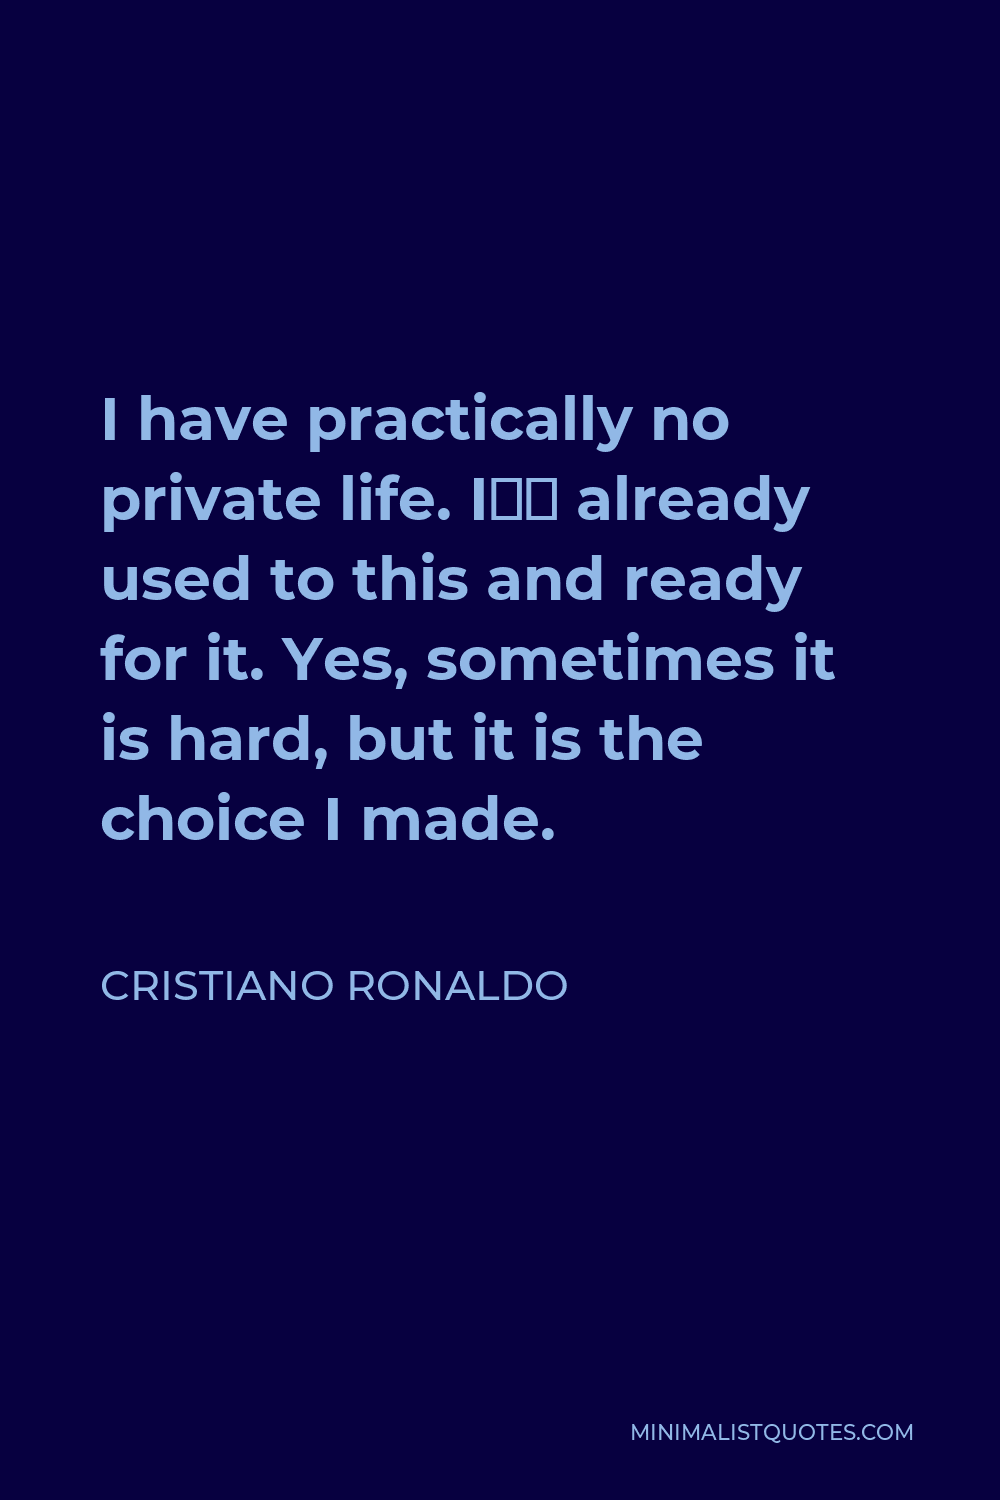 Cristiano Ronaldo Quote - I have practically no private life. I’m already used to this and ready for it. Yes, sometimes it is hard, but it is the choice I made.